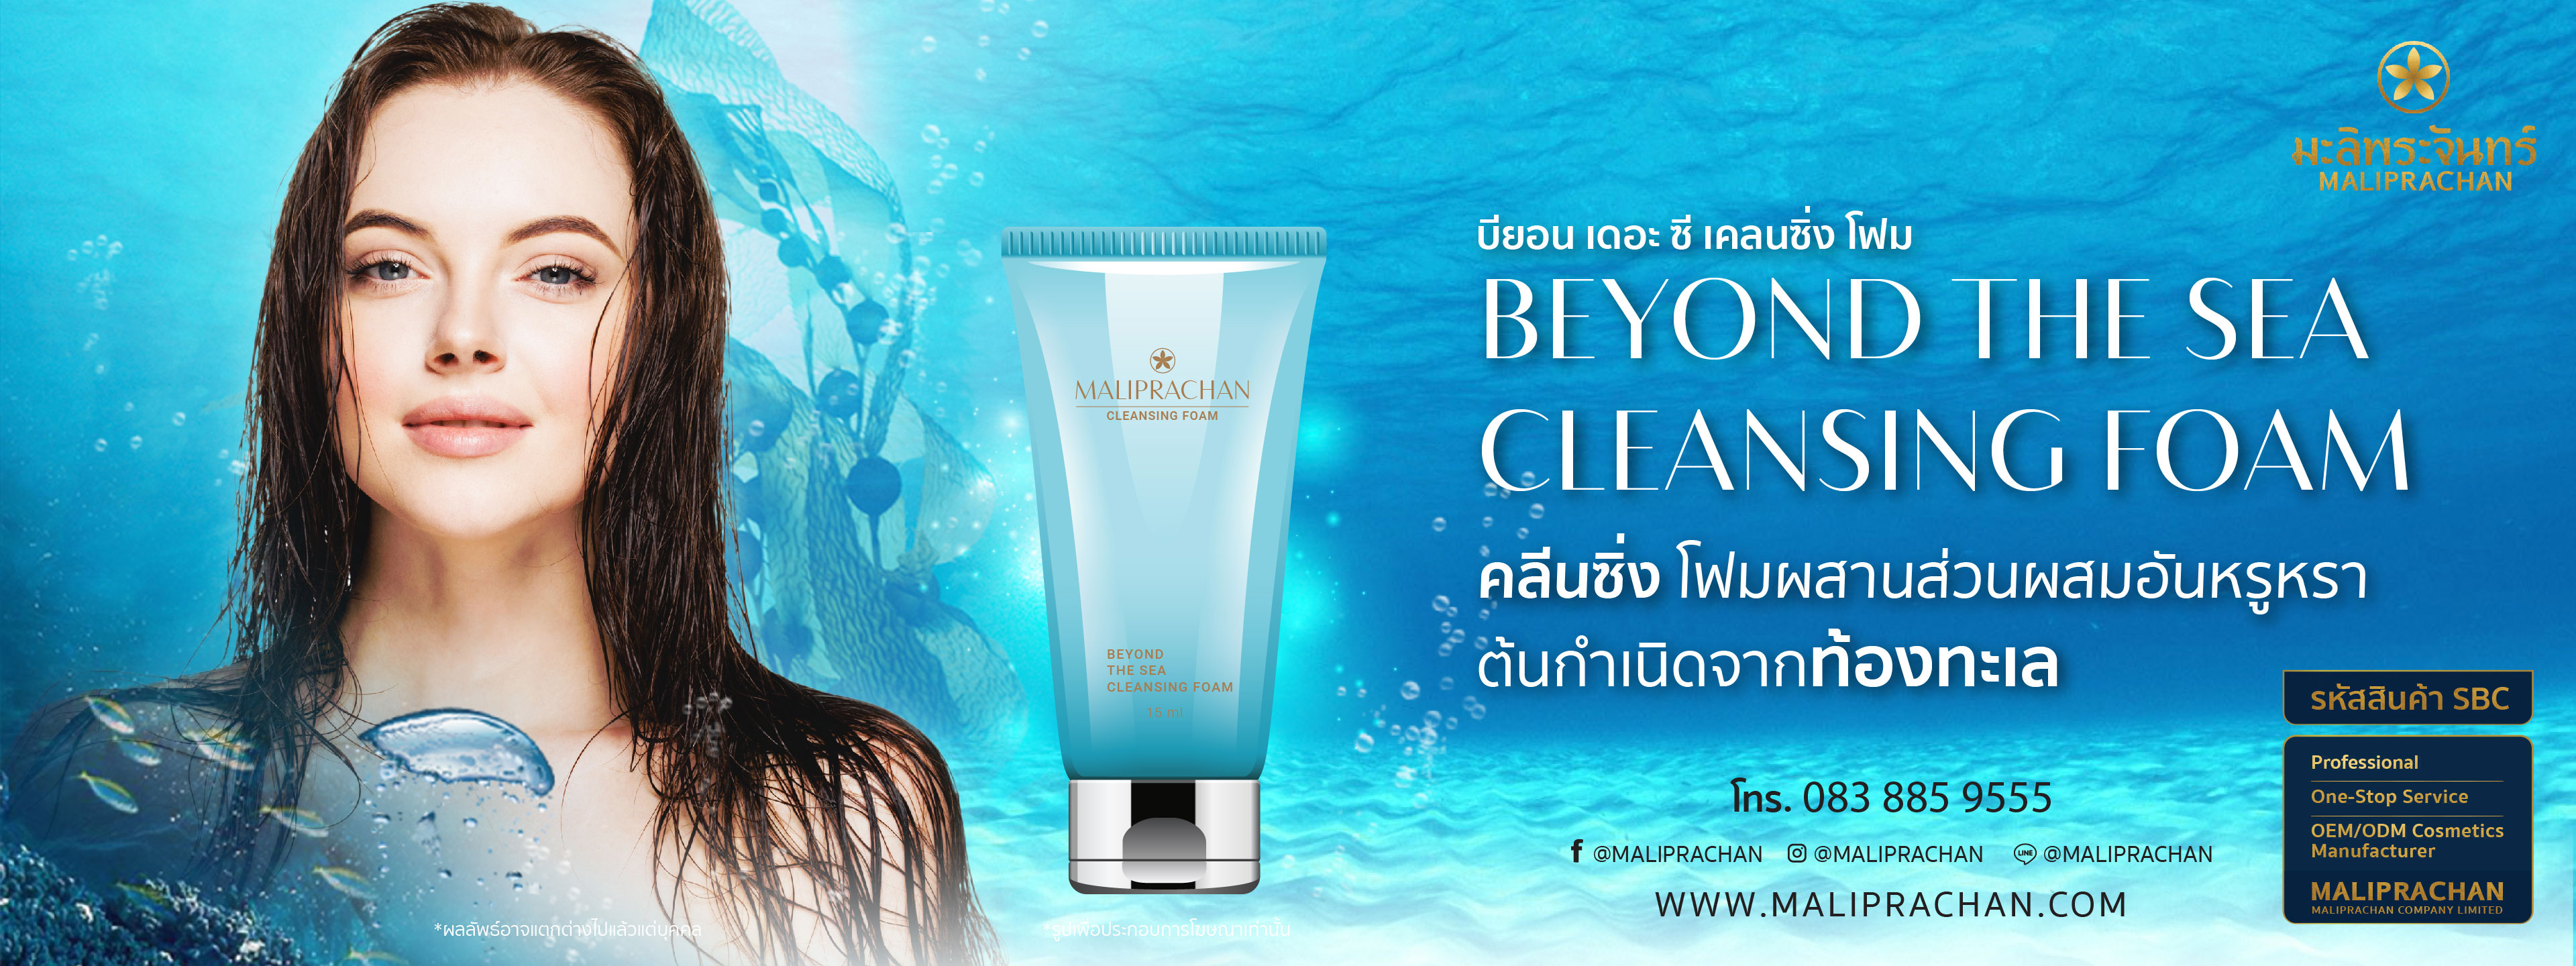 Beyond the Sea Cleansing foam